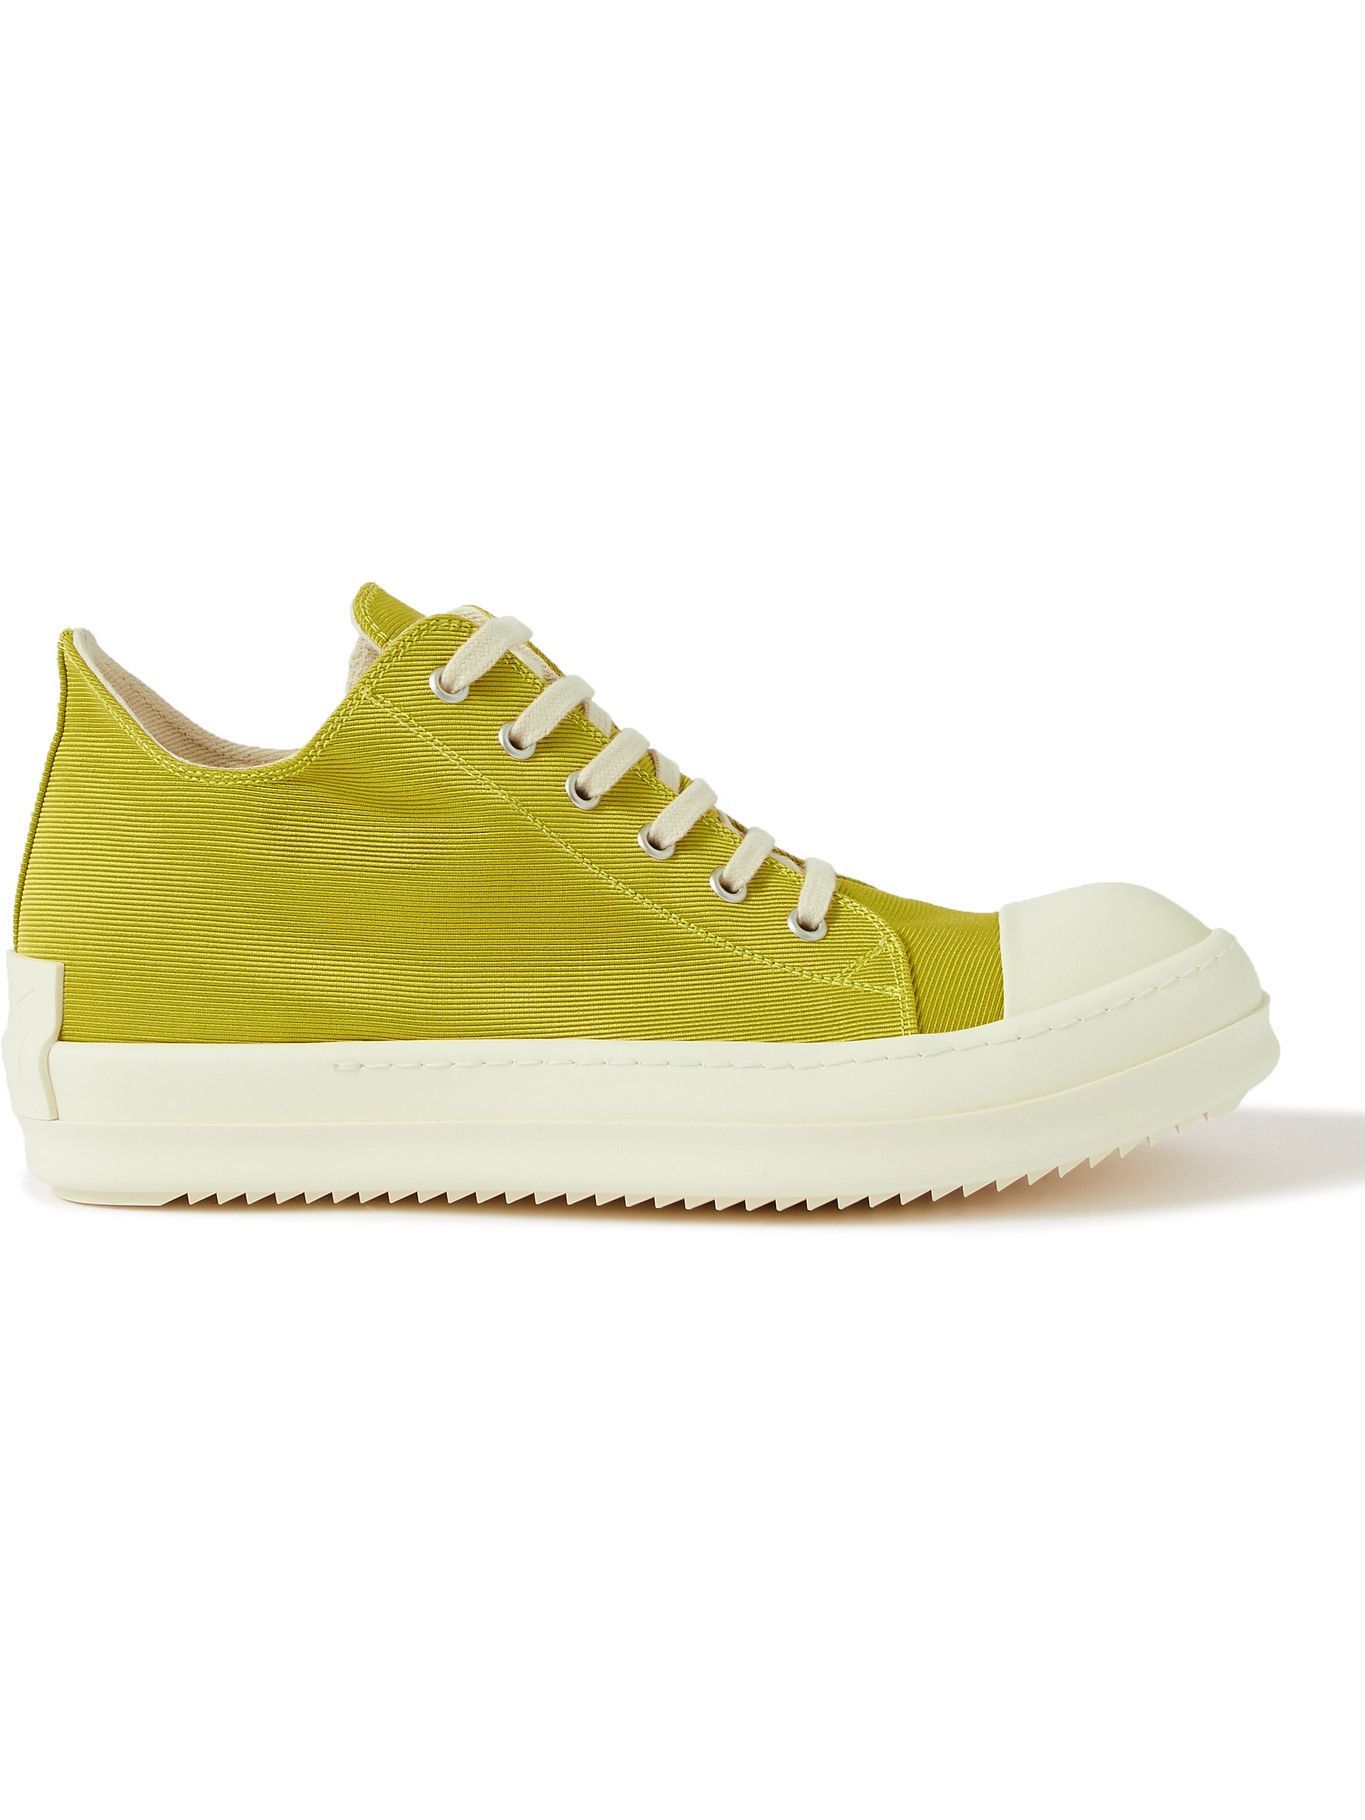 Rick Owens - Scarpe Rubber-Trimmed Canvas Sneakers - Yellow Rick Owens